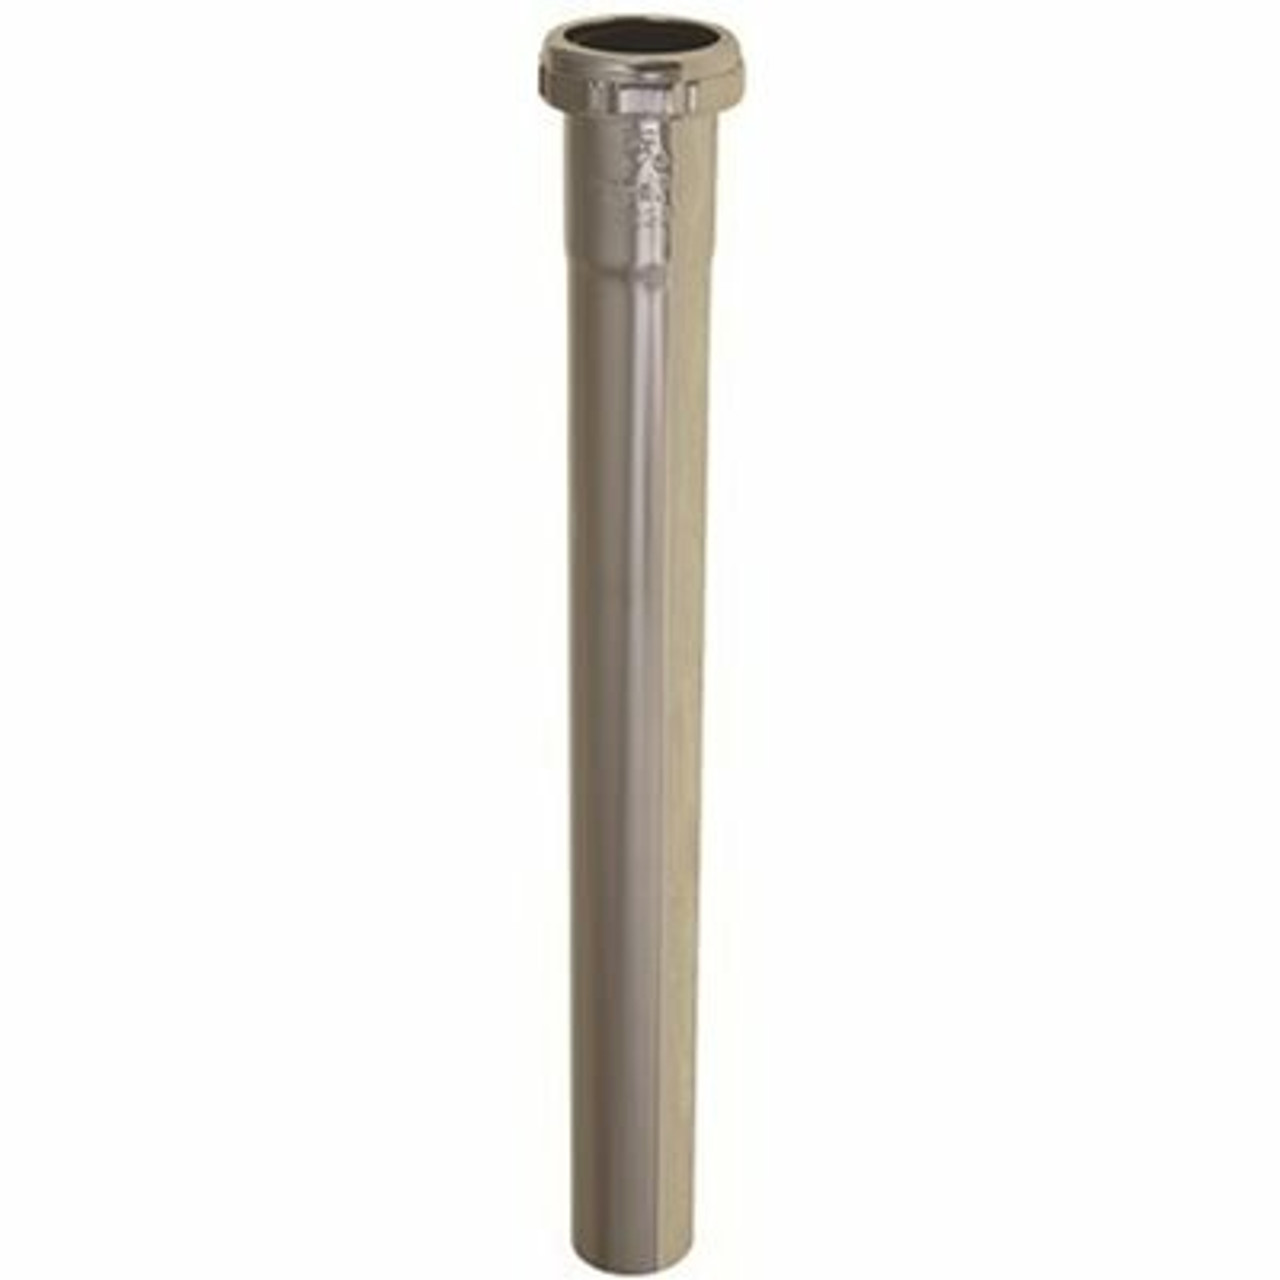 Premier 1-1/4 In. X 12 In. Brass Extension Tube With Slip Joint, Chrome, 22-Gauge